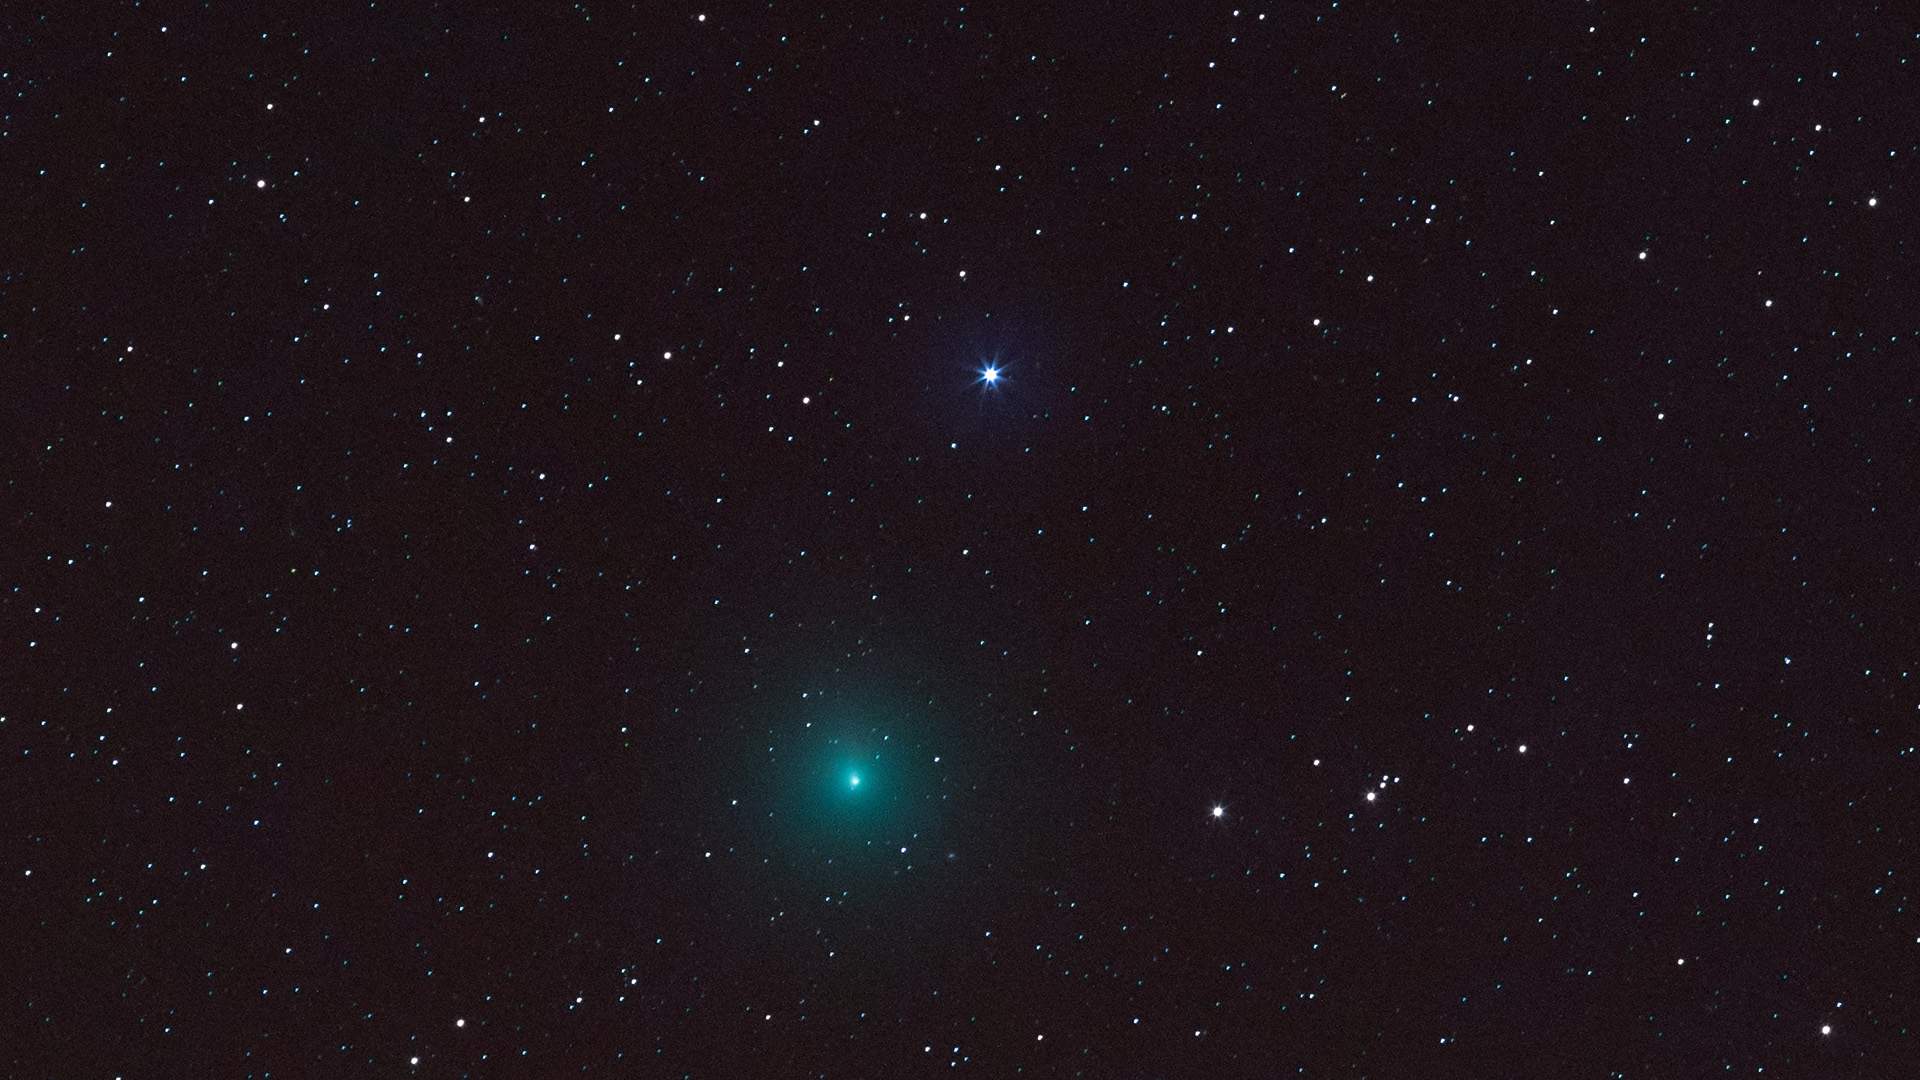 The Glowing Green 'Christmas Comet' Will Be Visible Down Under This Week